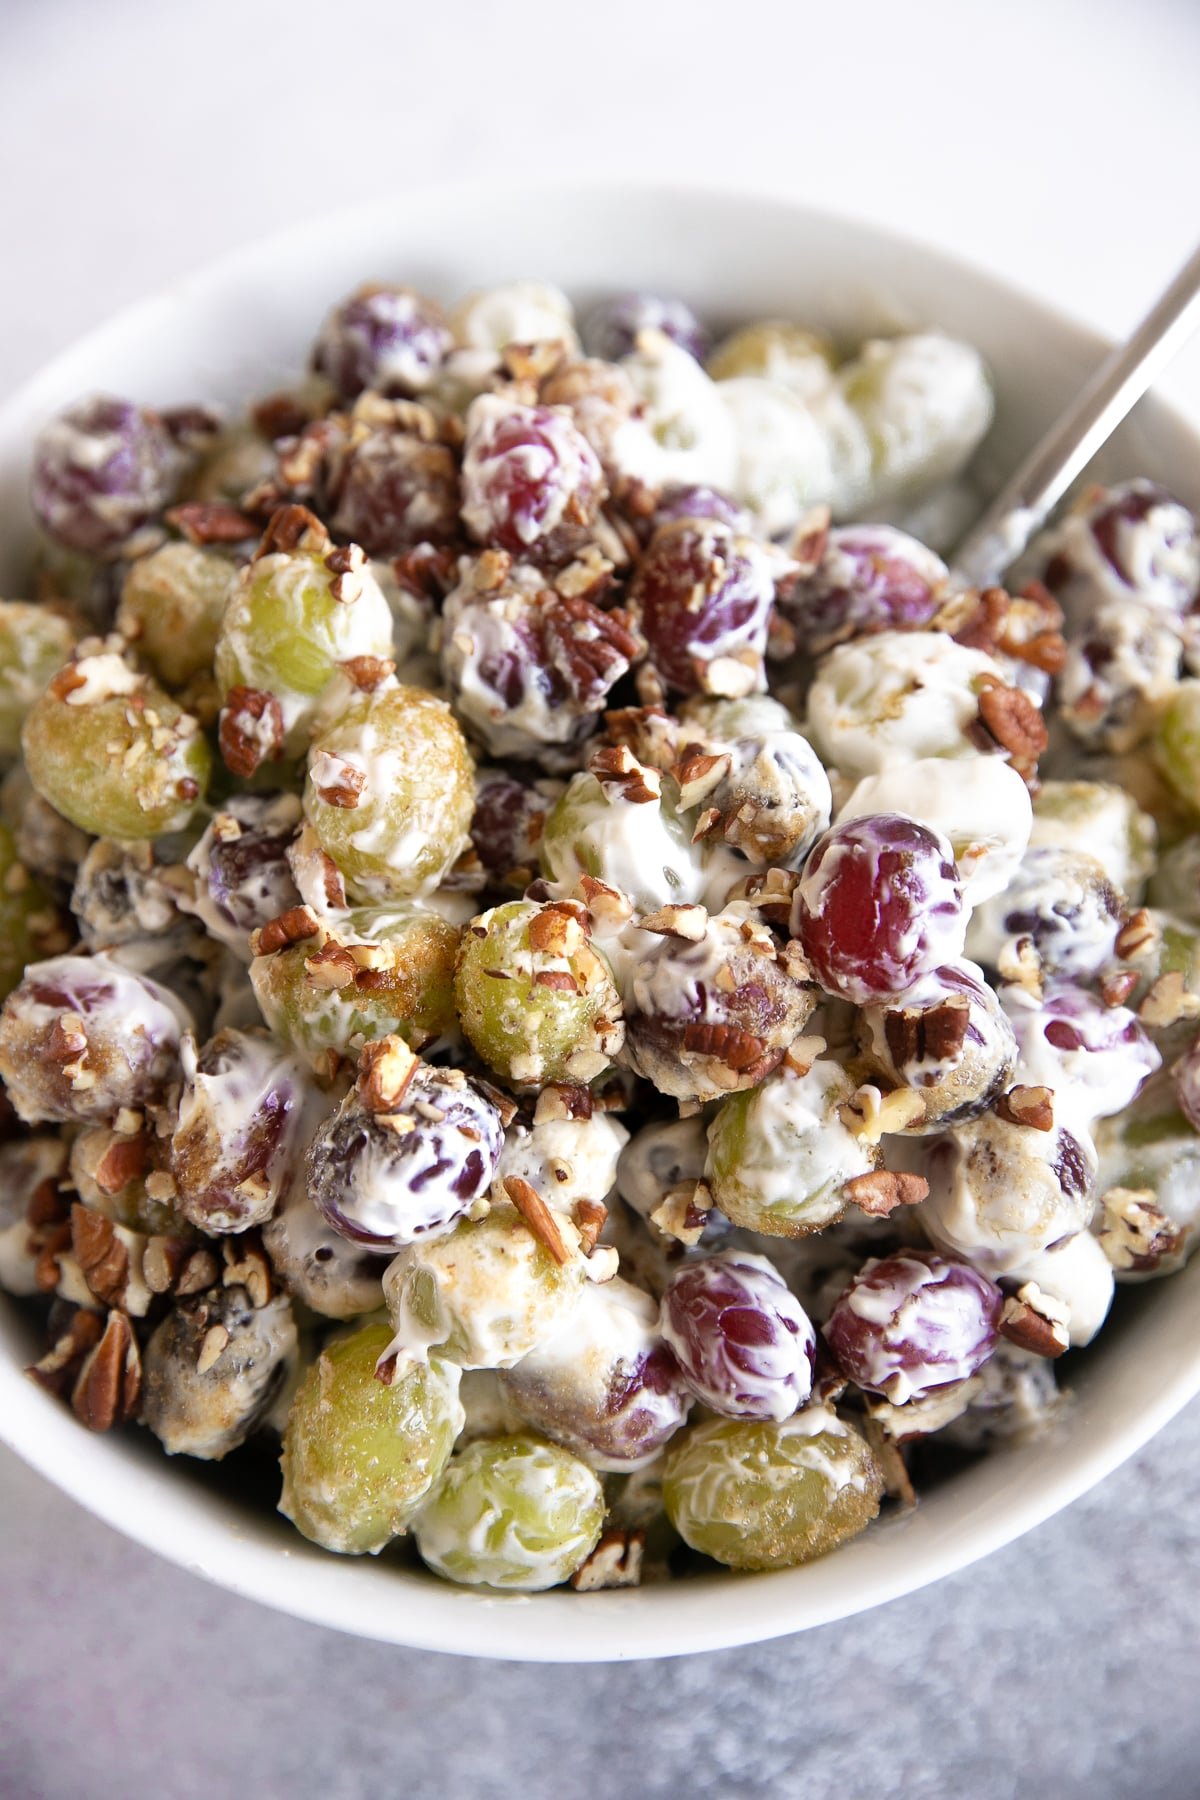 Creamy grape salad tossed with nuts and sprinkled with brown sugar.